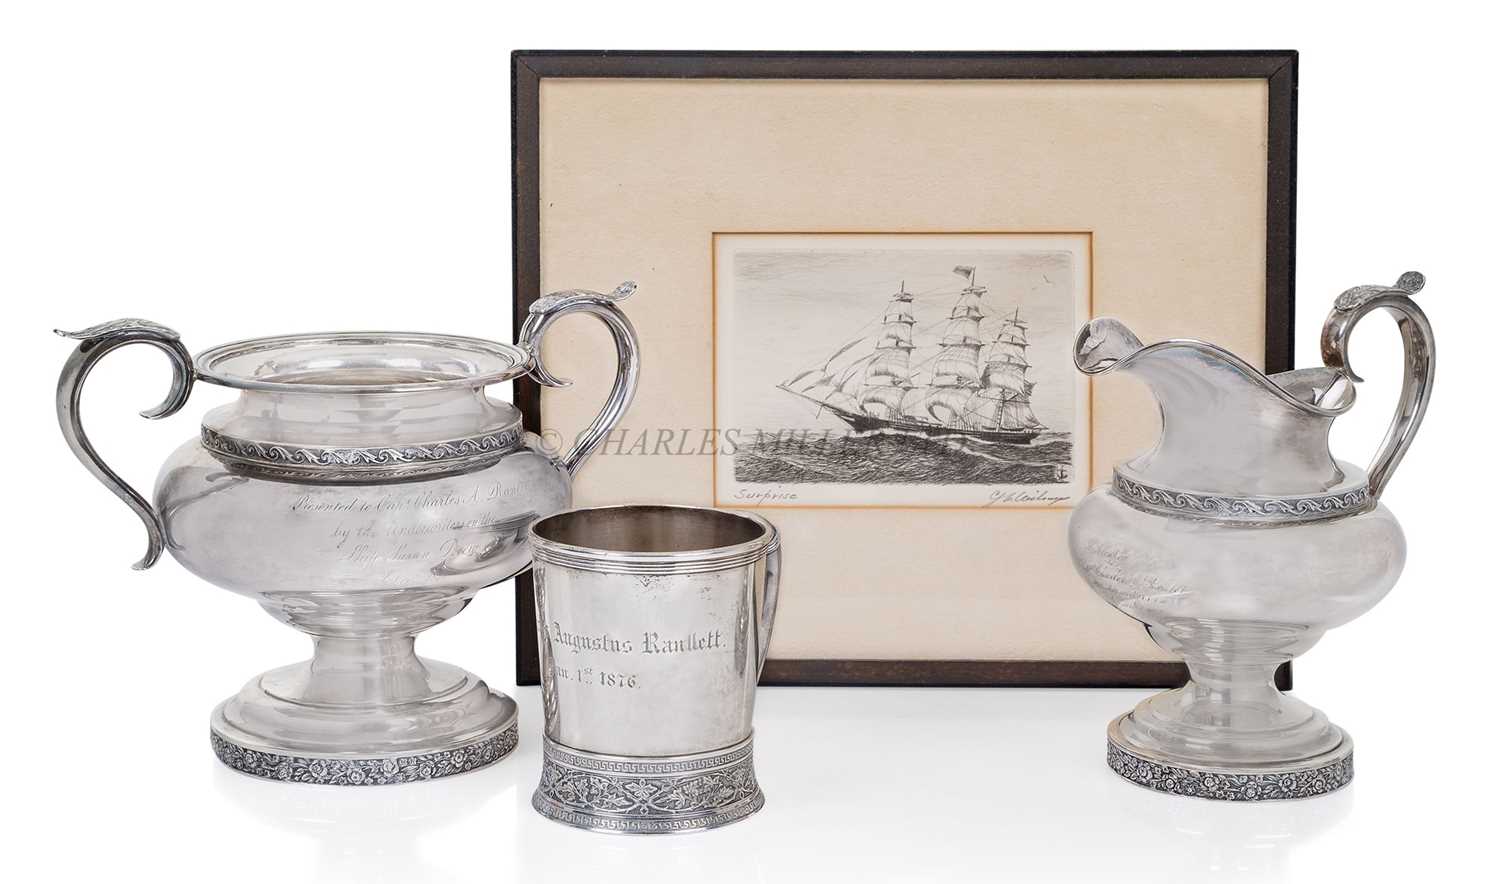 Lot 39 - A COLLECTION OF ARTEFACTS ASSOCIATED WITH THE AMERICAN CLIPPER SHIP SURPRISE AND THE RANLETT FAMILY